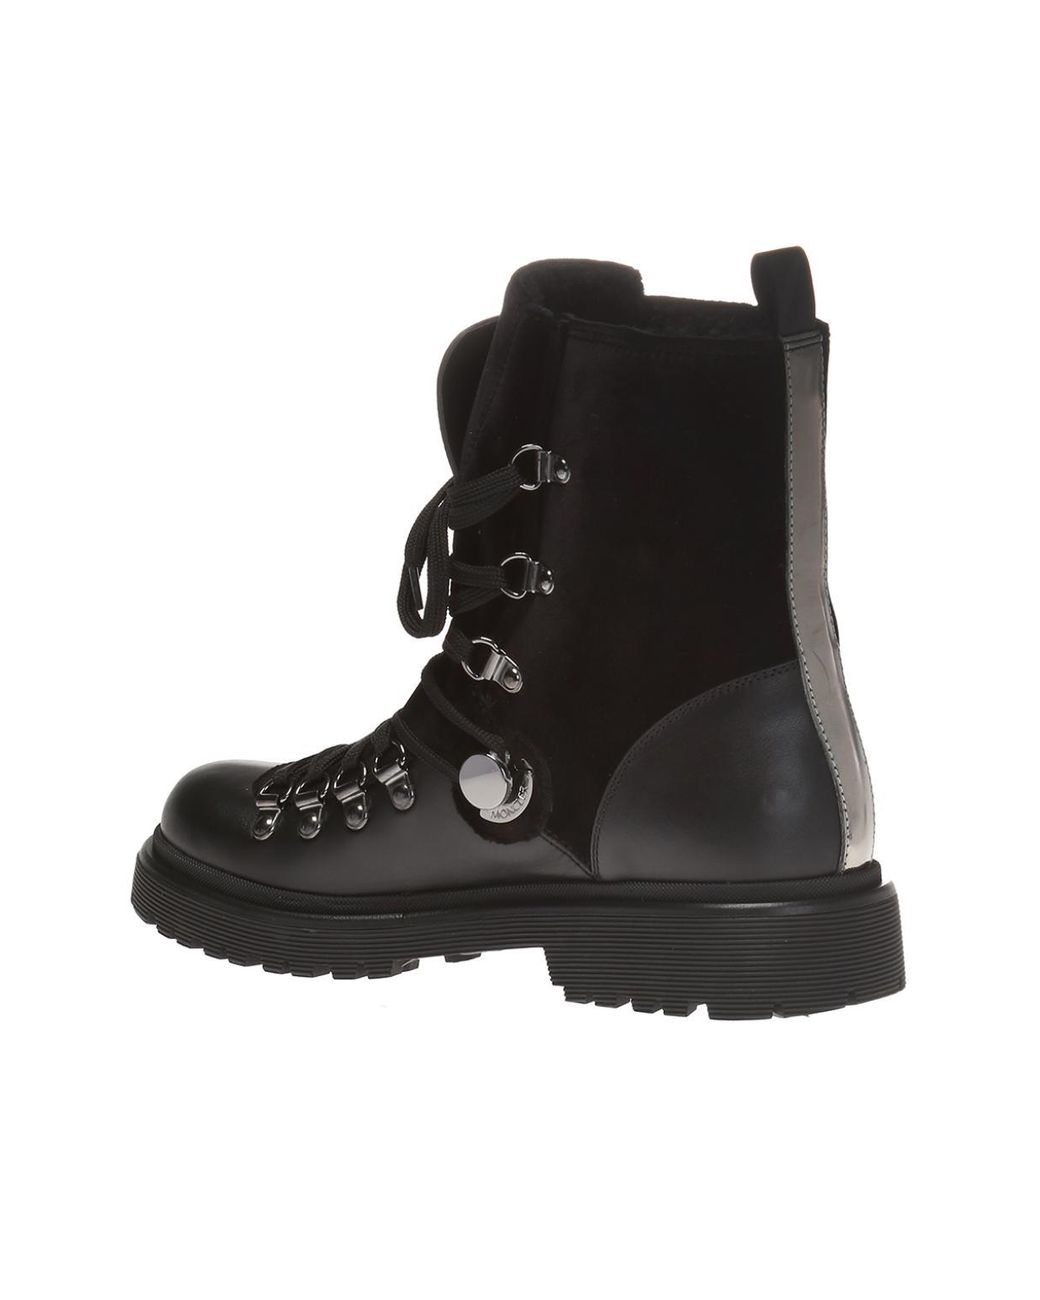 Moncler 'berenice' Padded Boots in Black | Lyst